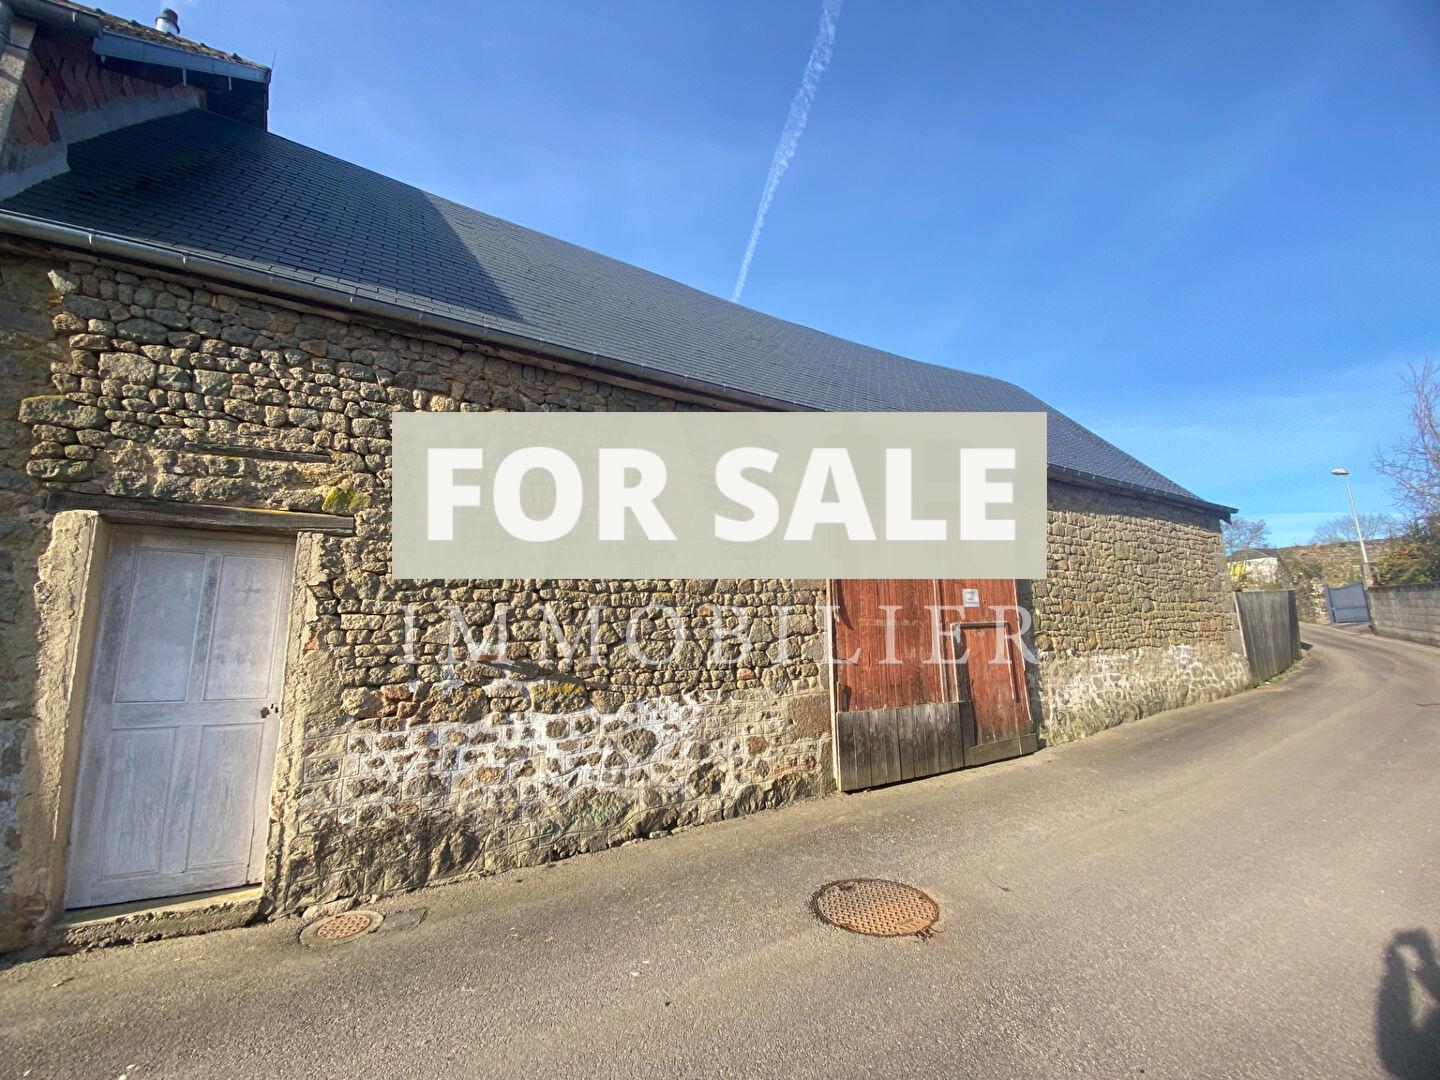 Main Photo of a Barn for sale